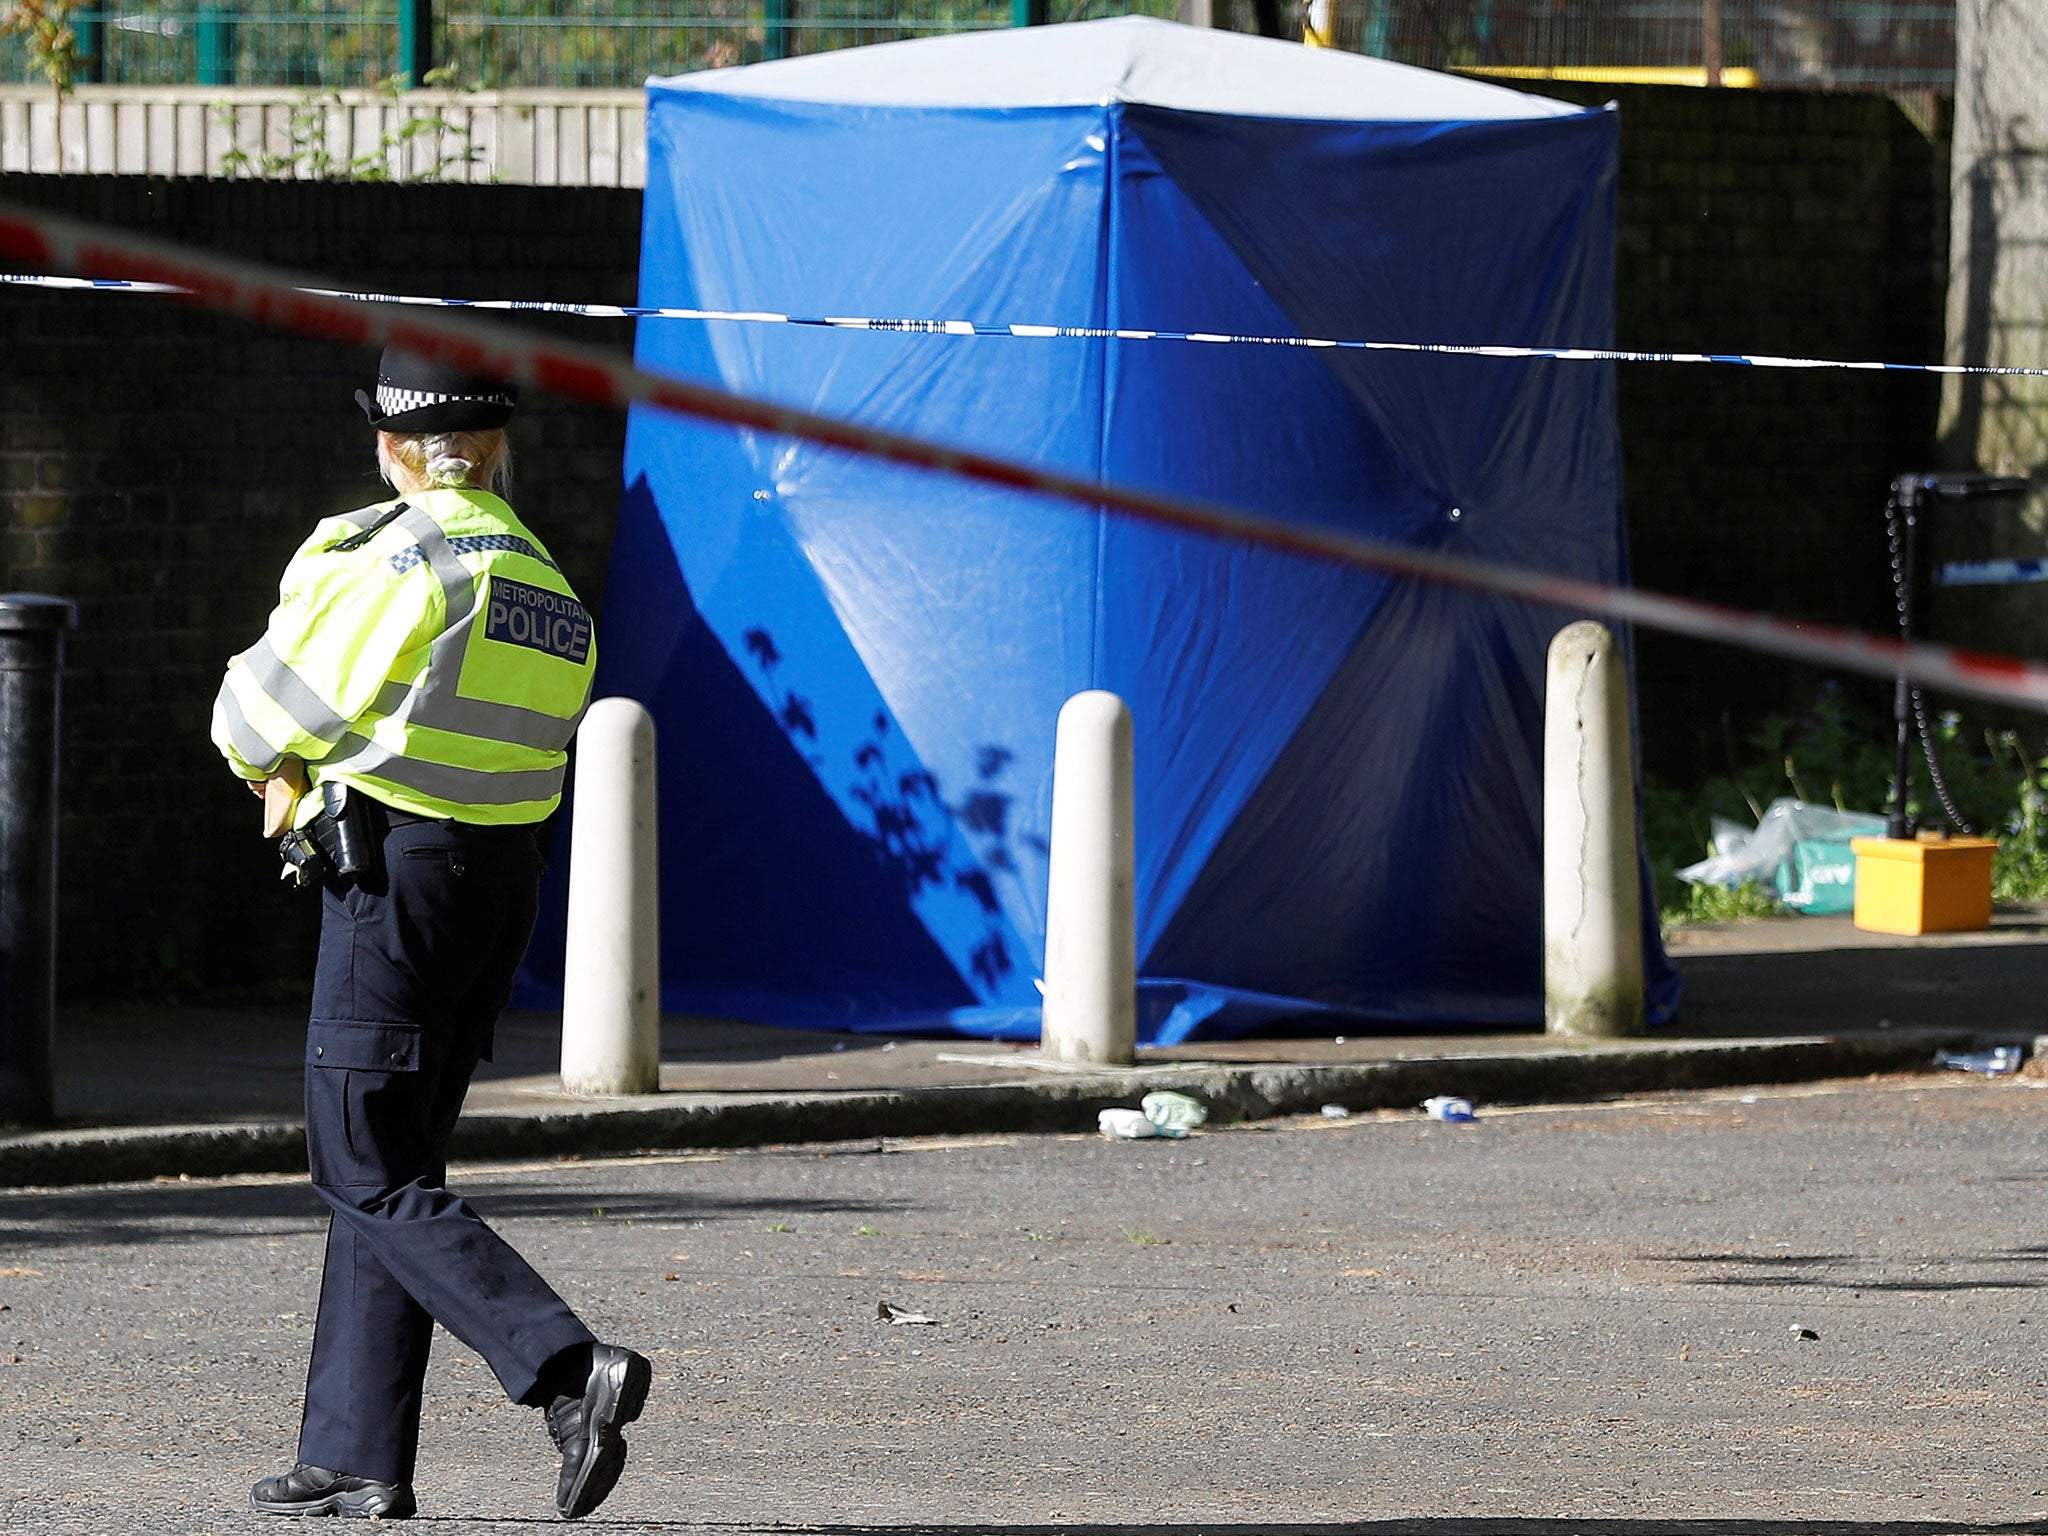 Four people have been murdered over the bank holiday in Liverpool, London and Luton